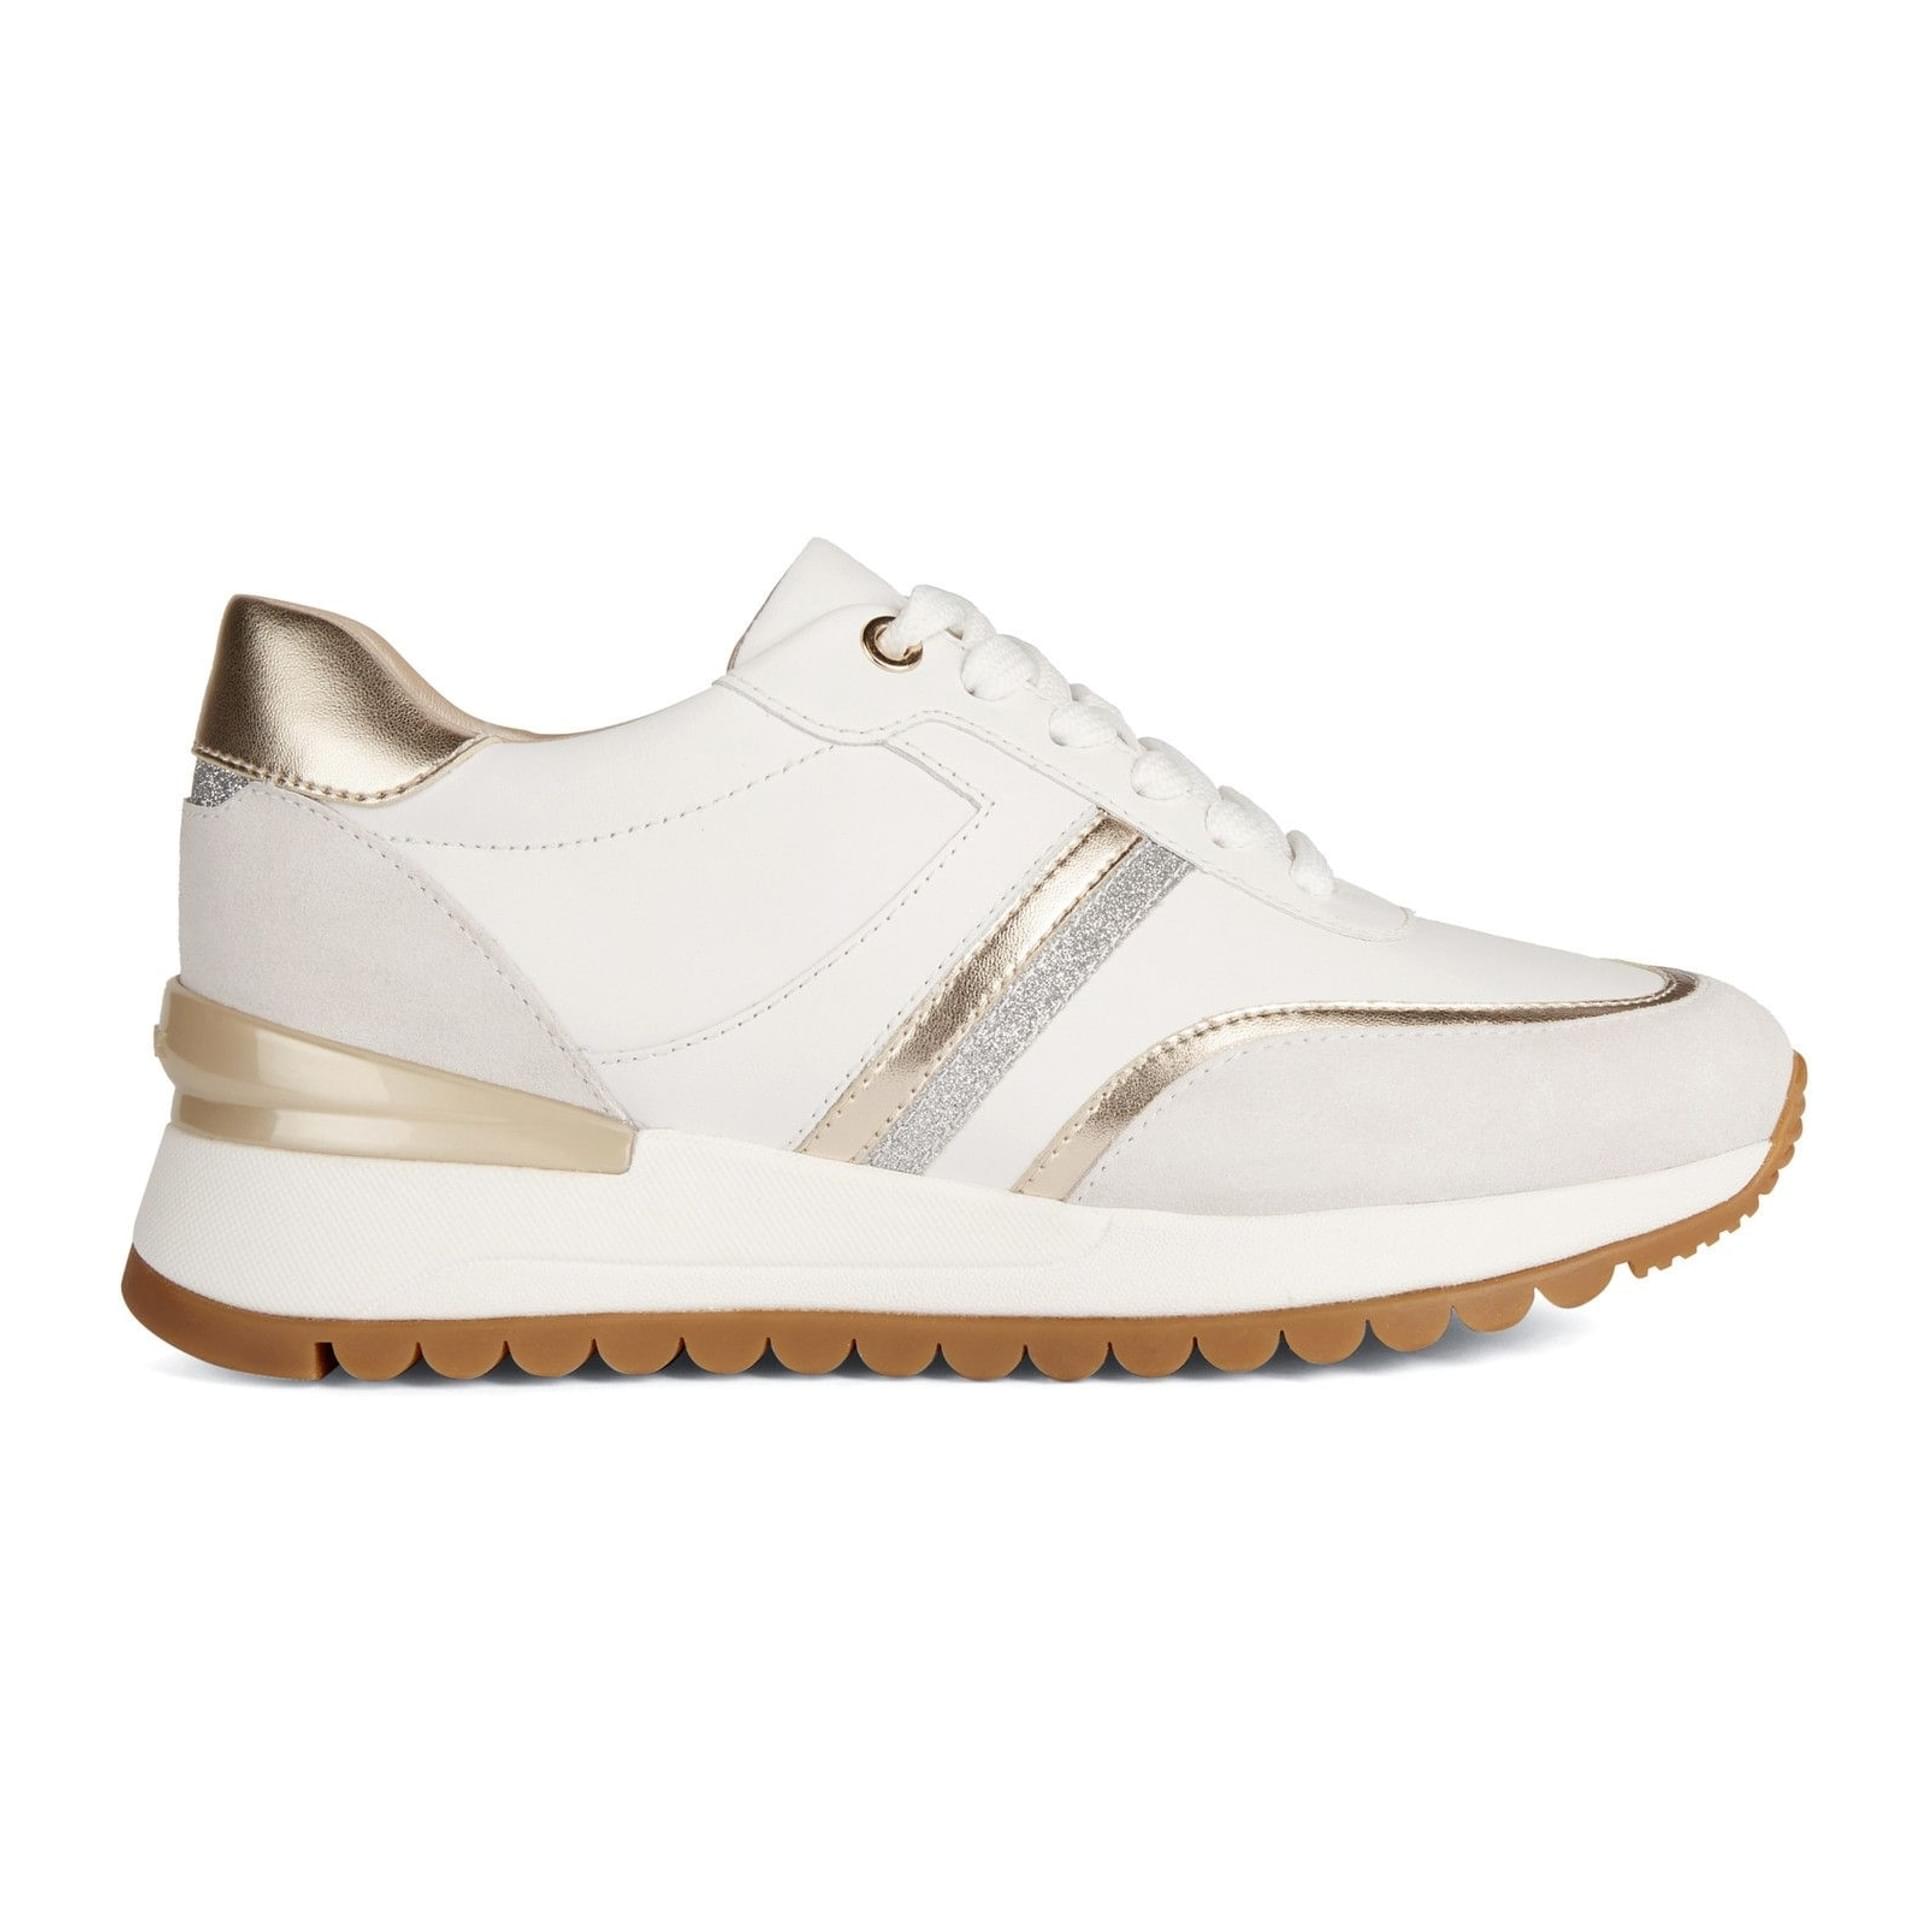 Geox Desya Sneakers D3500A_08522 in White/Off White